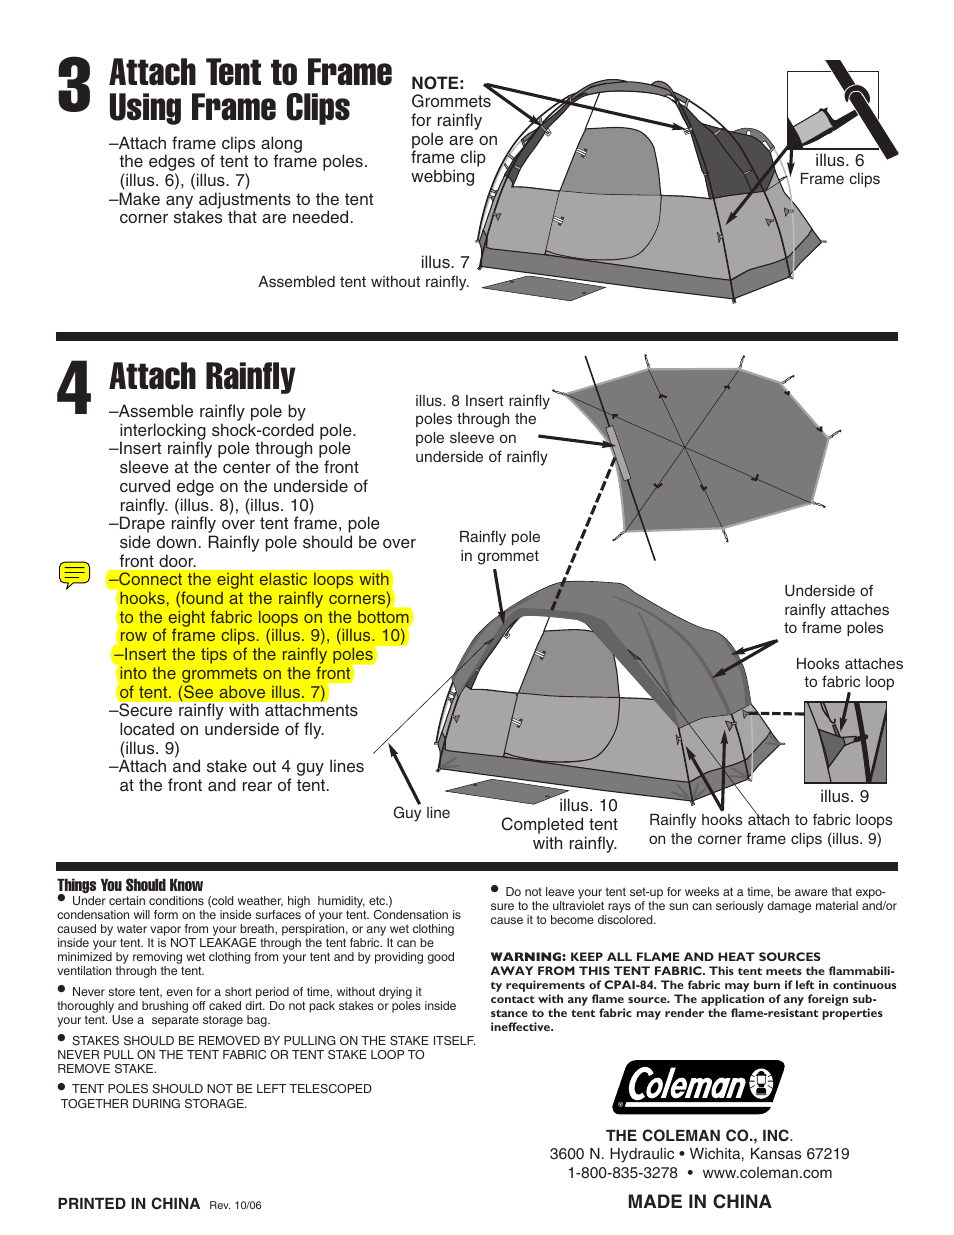 Attach tent to frame using frame clips, Attach rainfly | Coleman Tent  9277B151 User Manual | Page 2 / 2 | Original mode